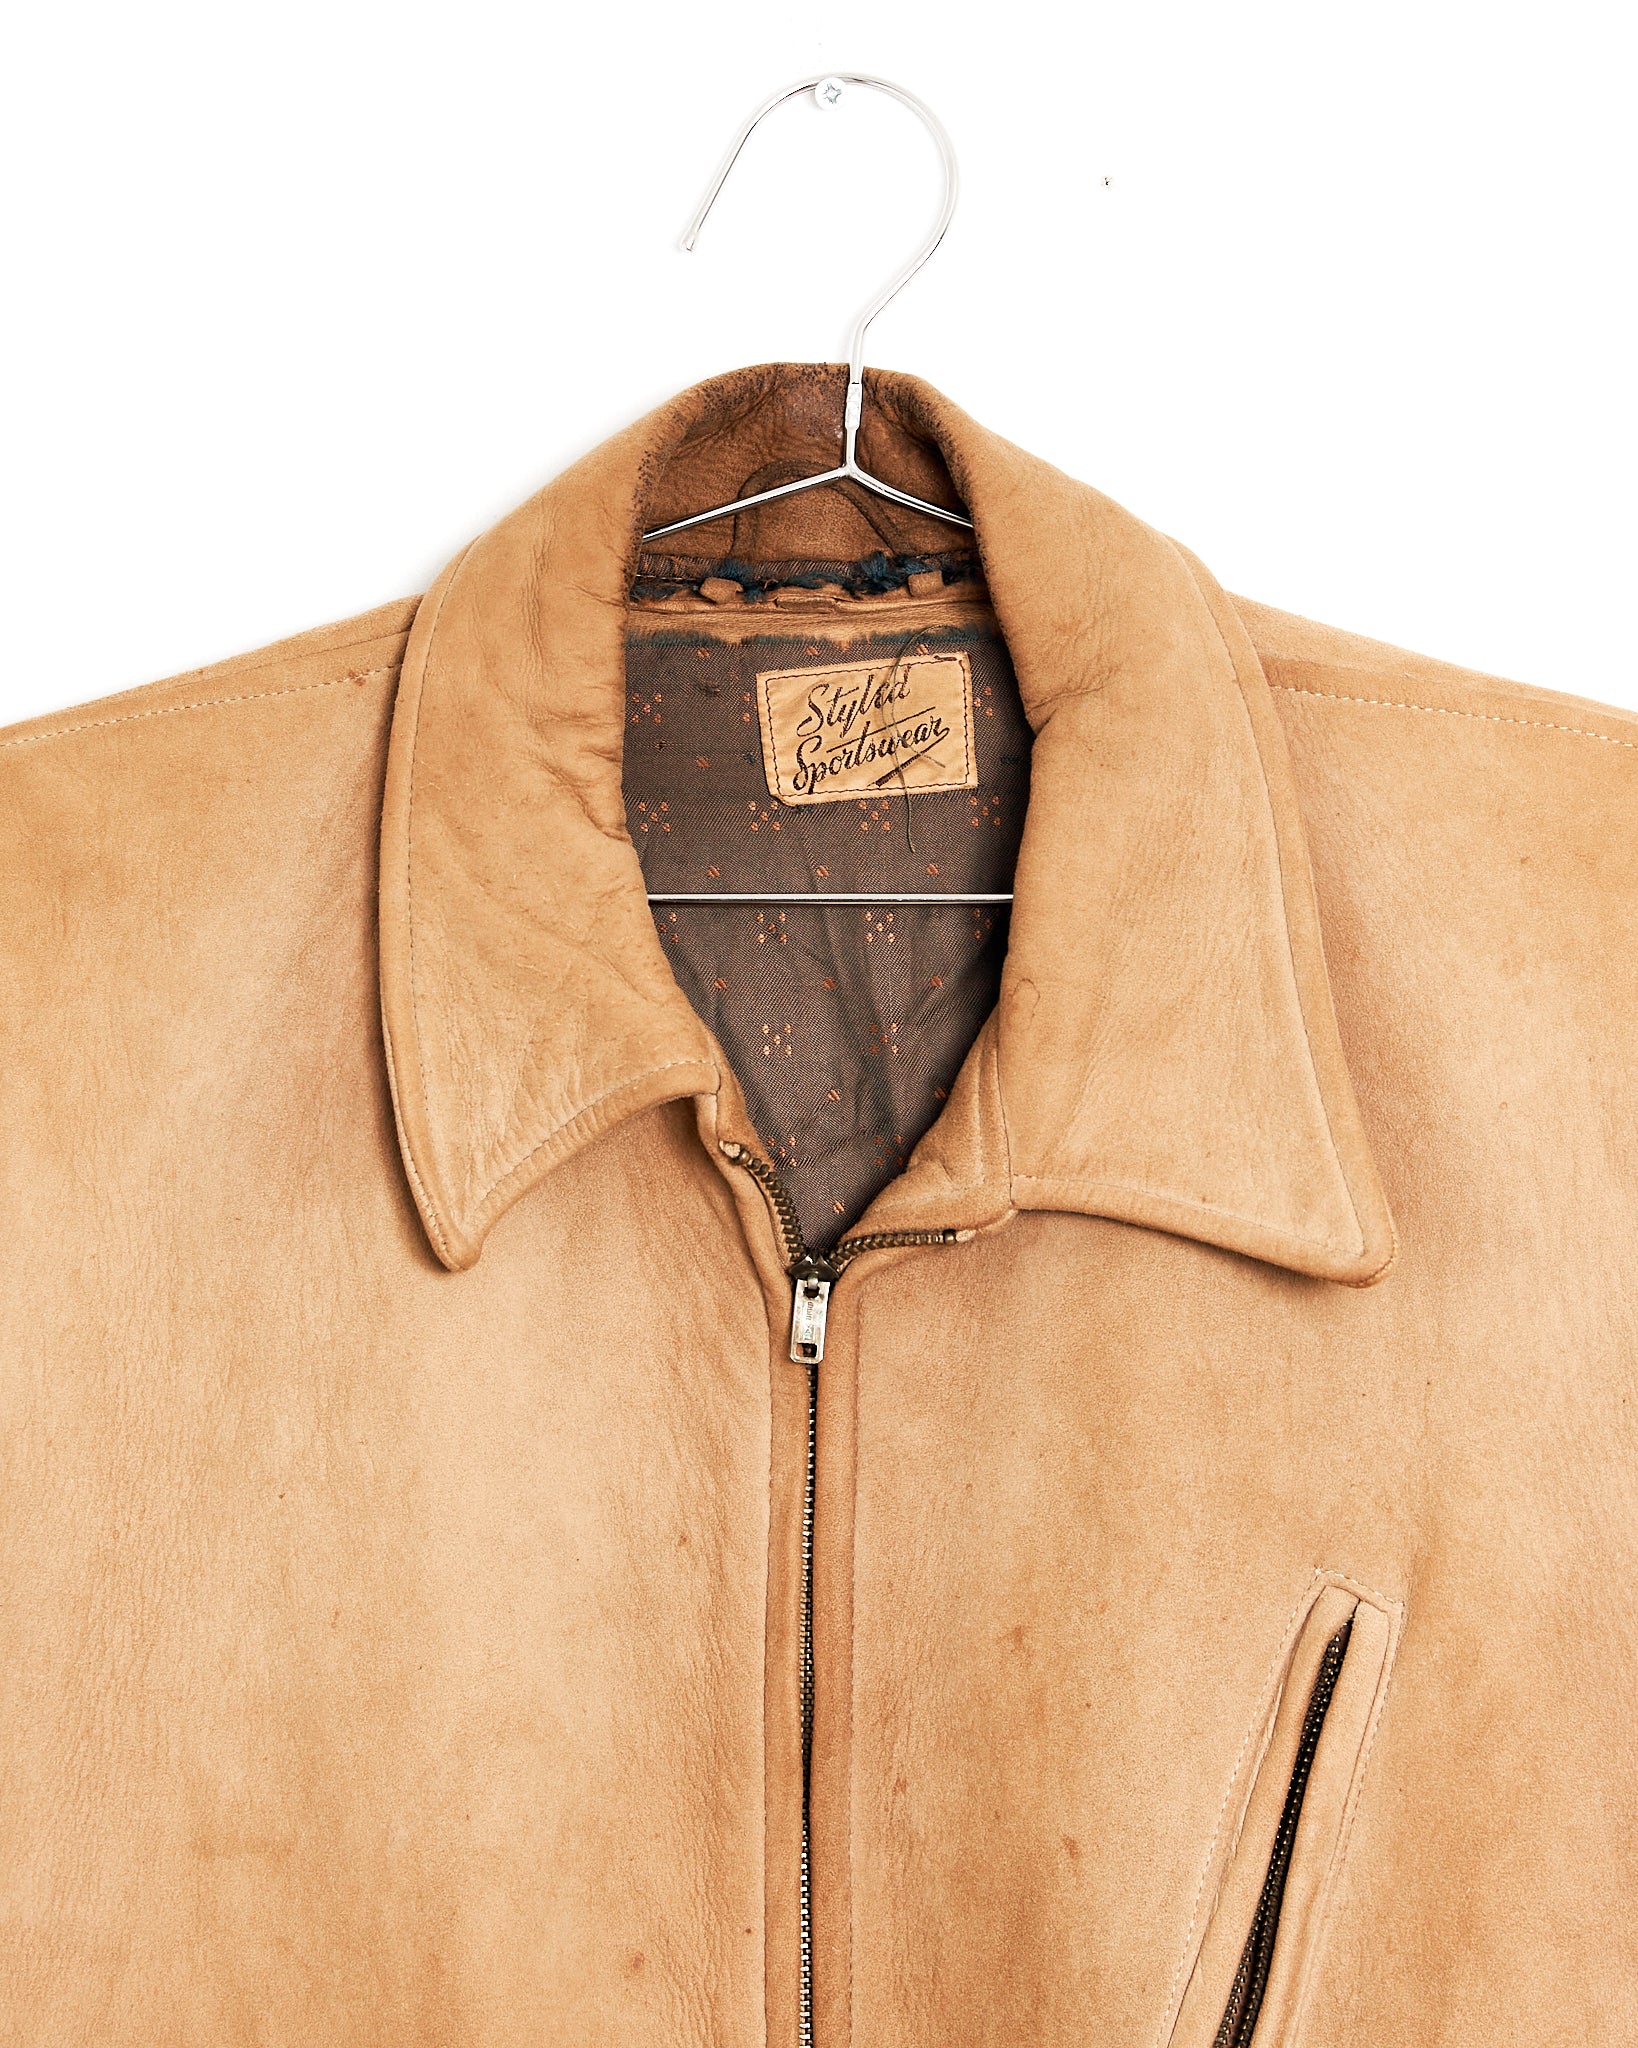 1960s Lambskin Suede Jacket – Coffee and Clothing